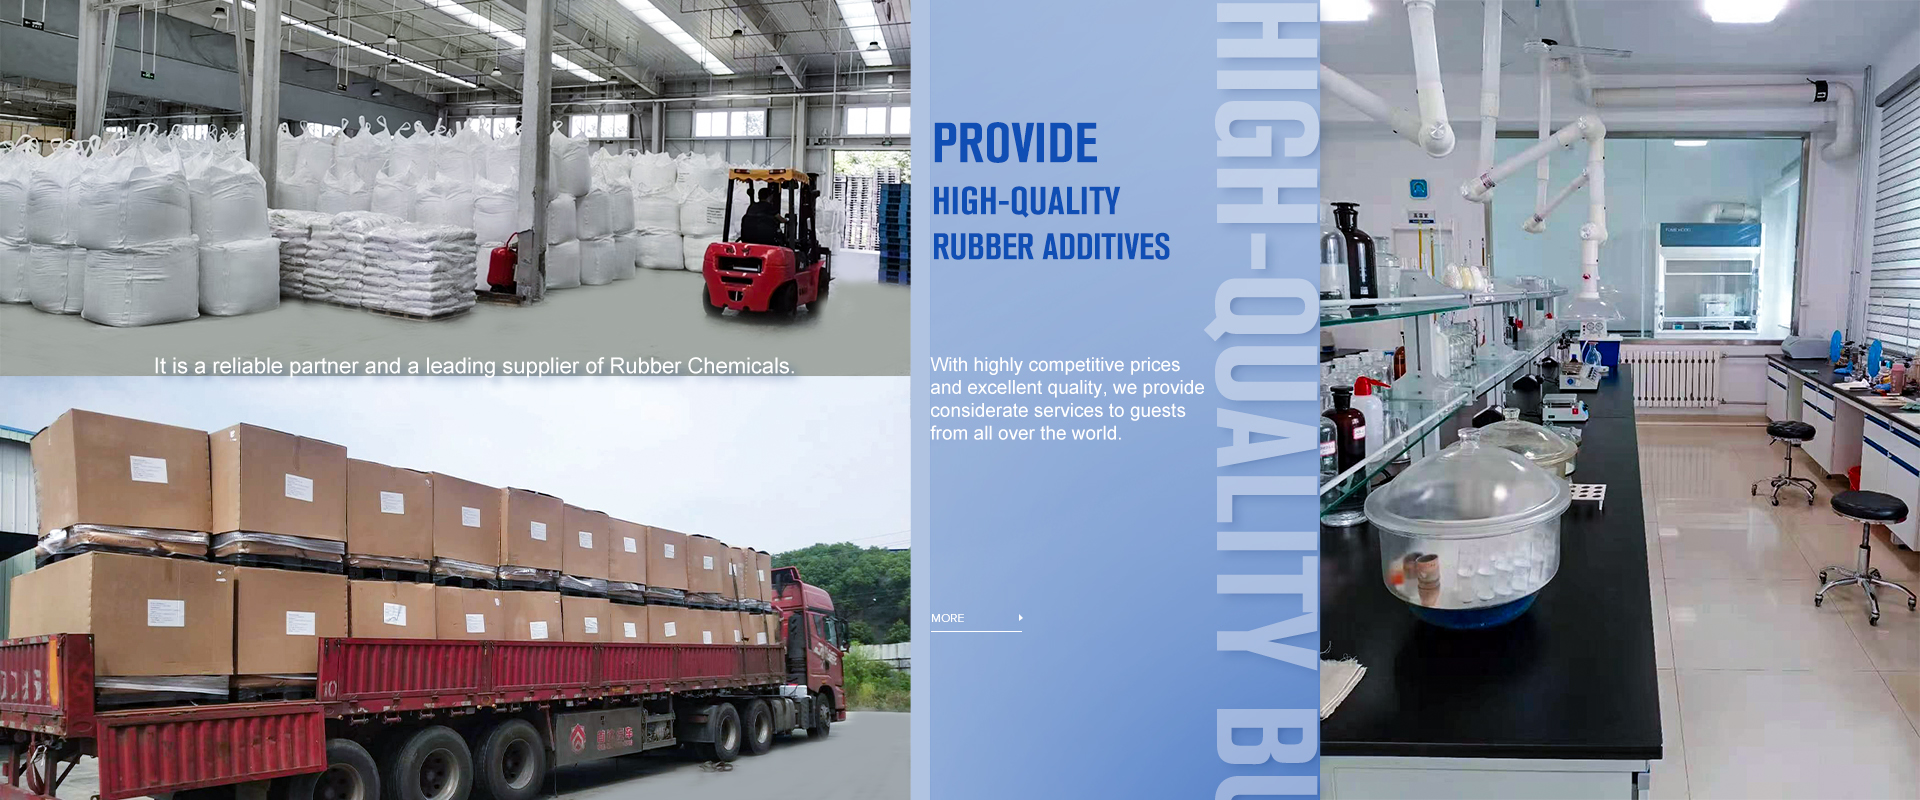 lt is a reliable partner and a leading supplier of Rubber Chemicals.